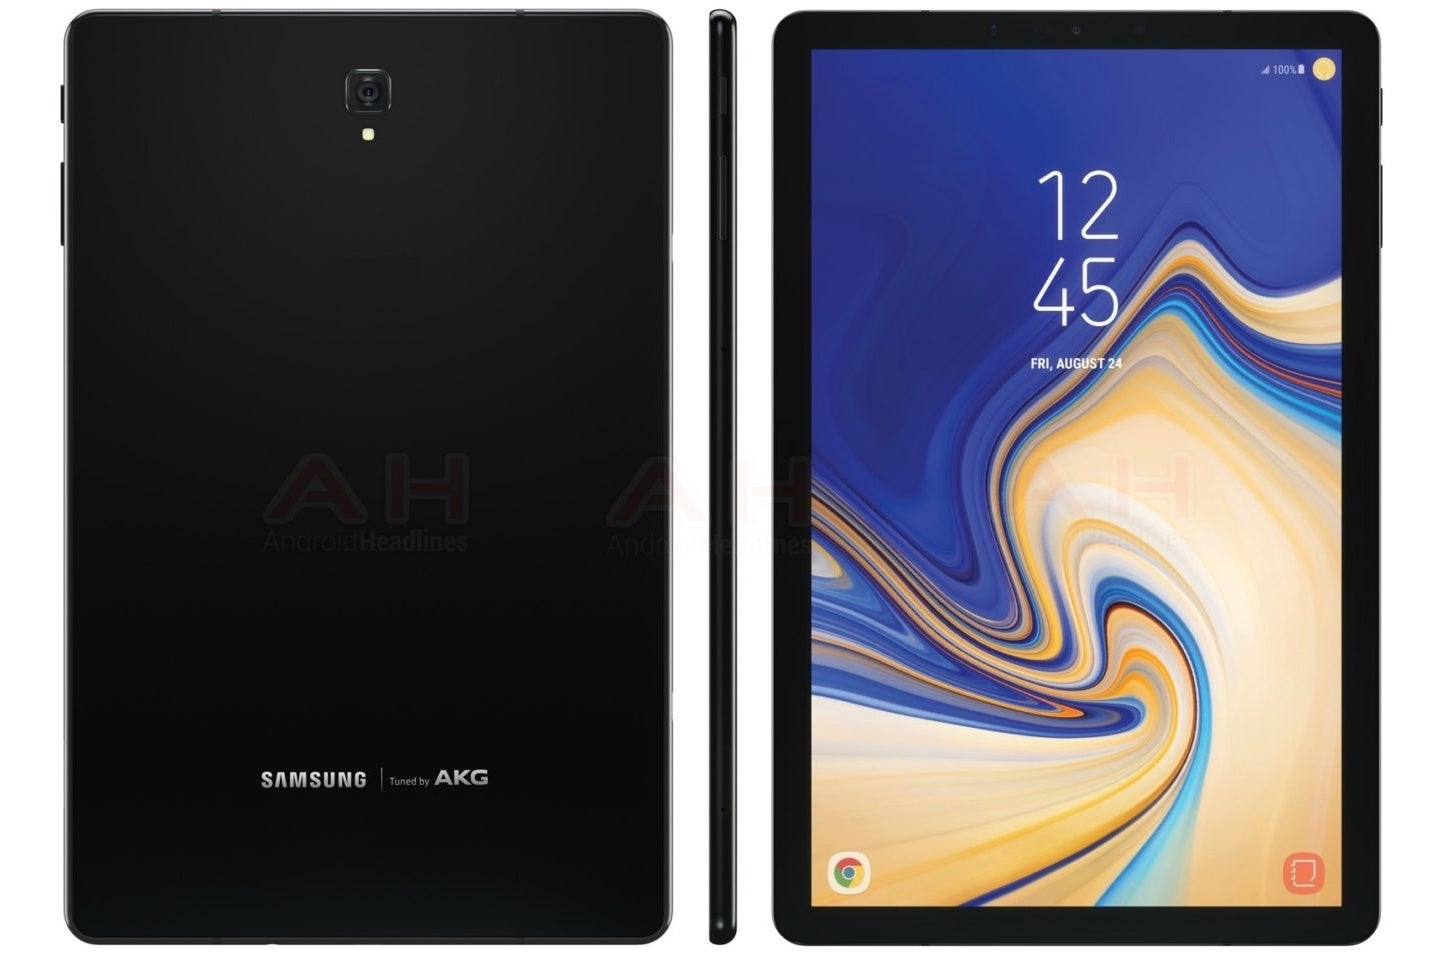 Alleged press render of the Galaxy Tab S4 from Android Headlines - Is this the Galaxy Tab S4? New render revealed